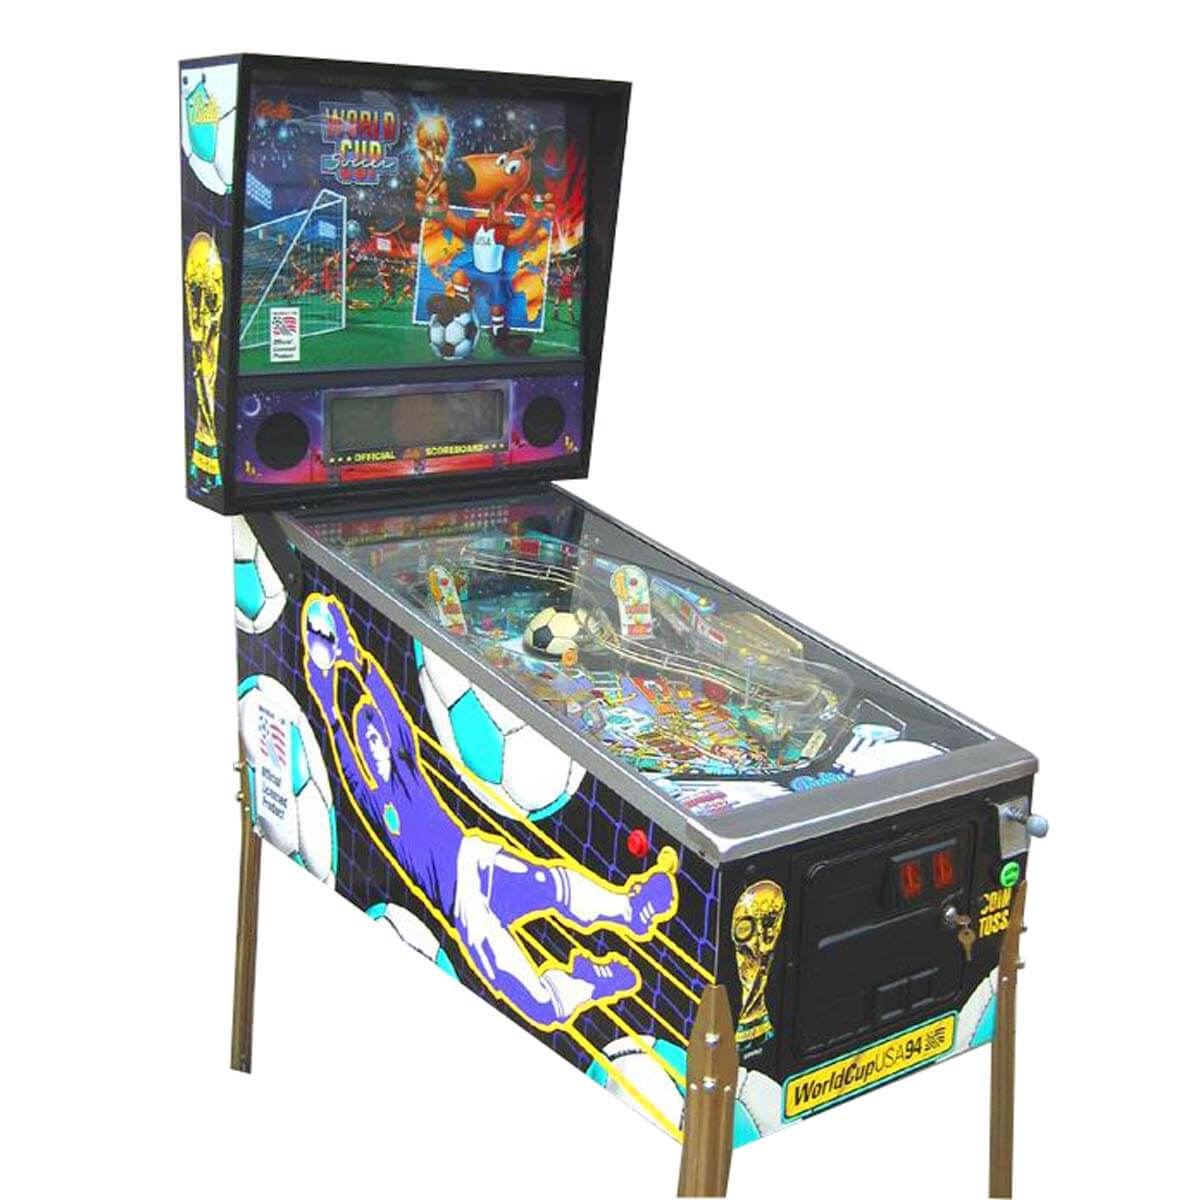 Details about   MIDWAY WORLD CUP SOCCER 94 PINBALL MACHINE PLAYFIELD PLASTIC CLEAR 31-1925-4-SP 